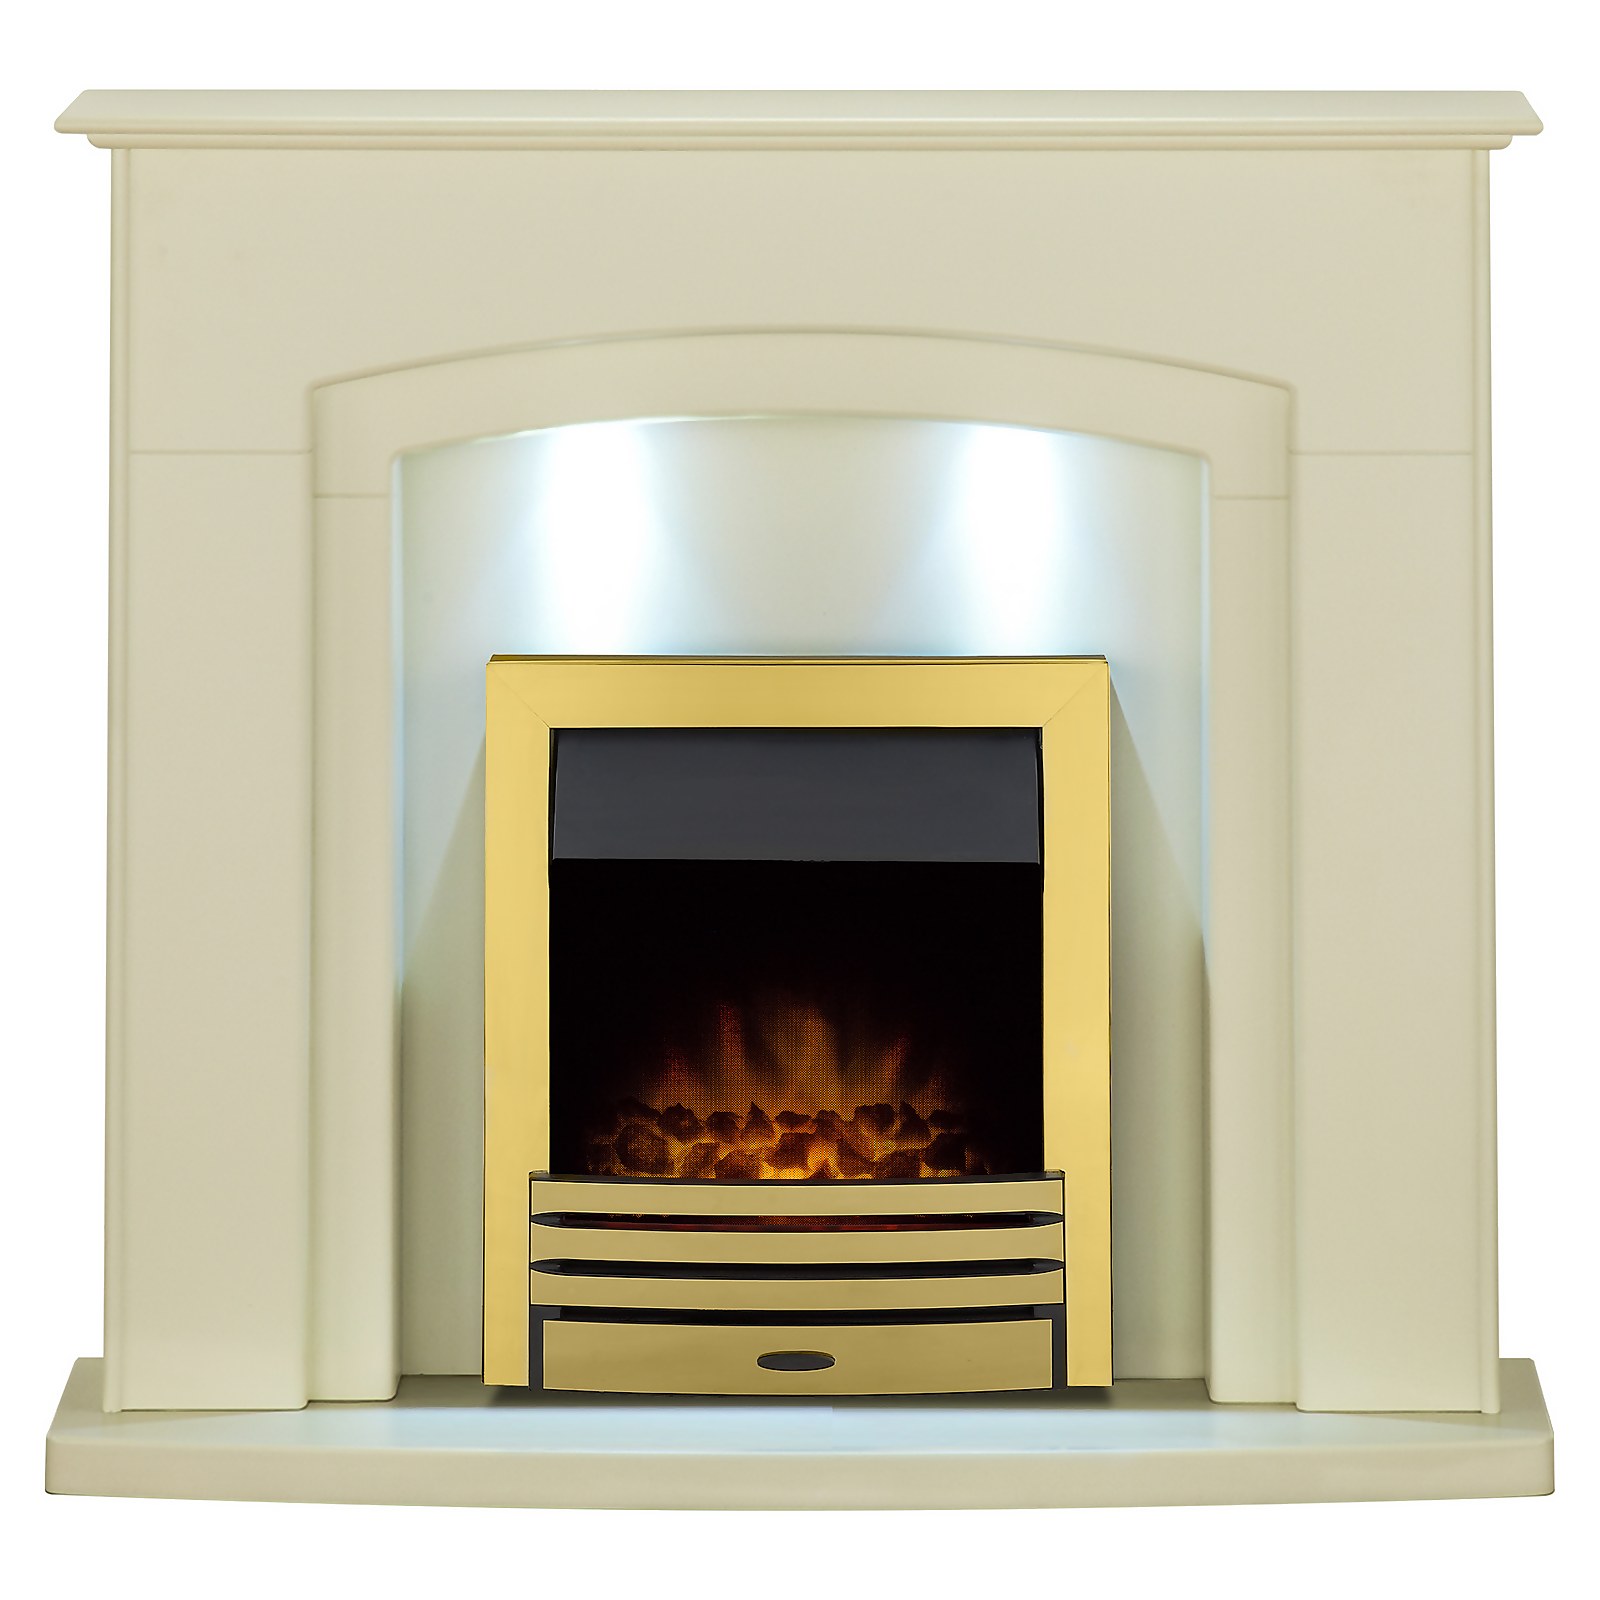 Photo of Adam Falmouth In Cream With Downlights & Eclipse Electric Fire In Brass